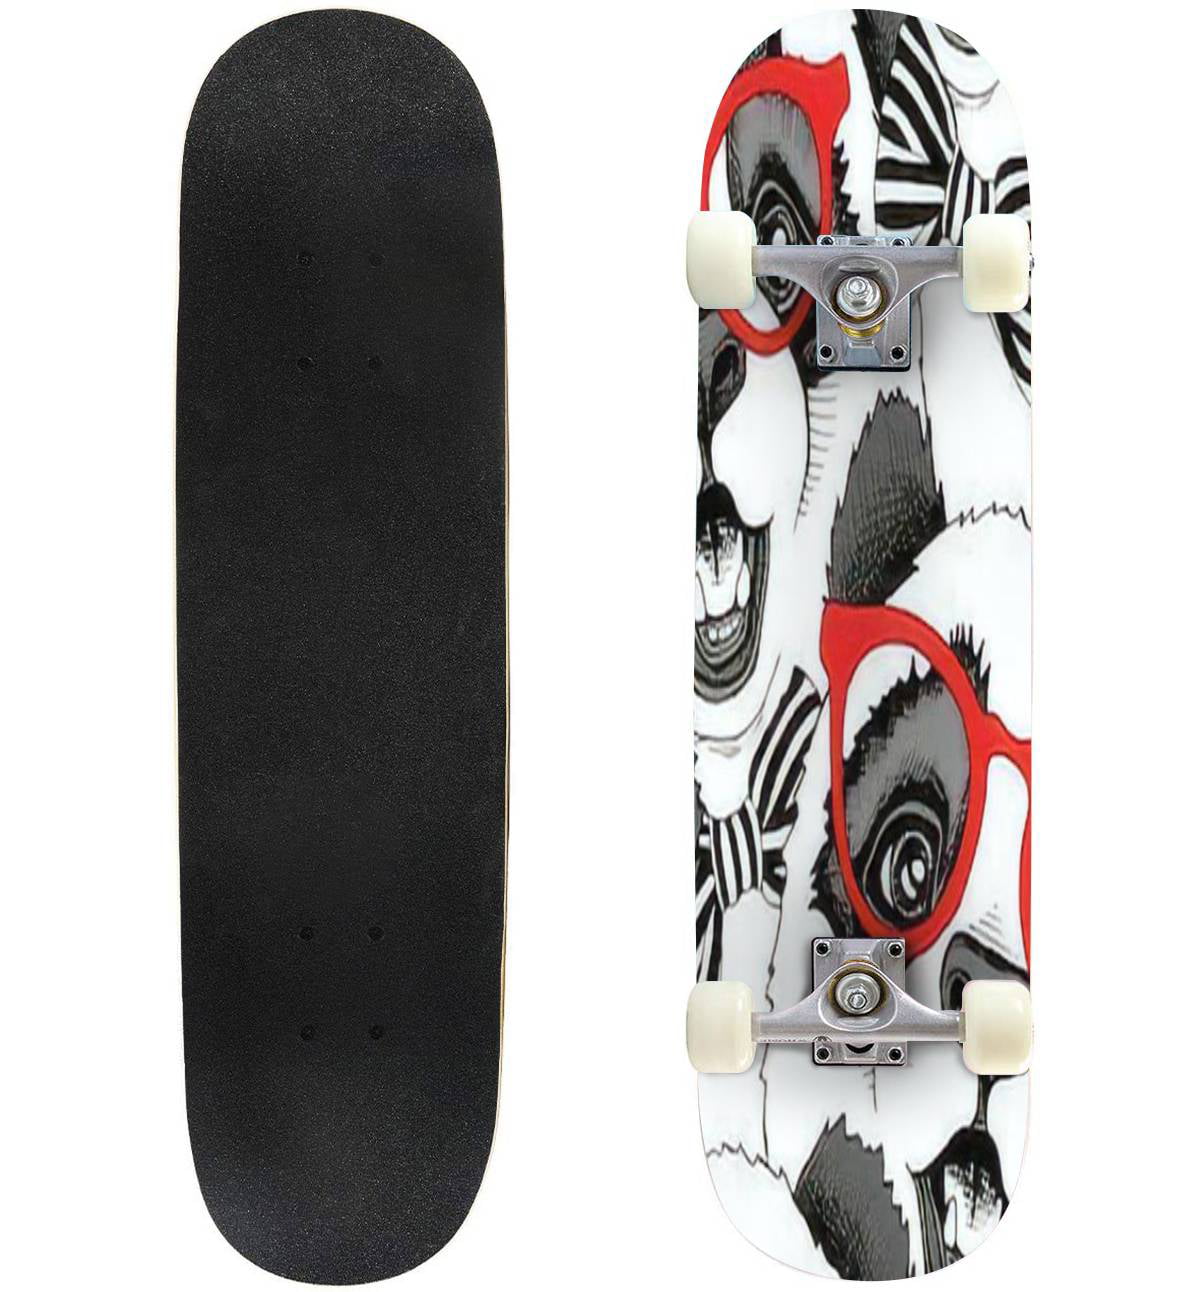 Hick stormloop Middel Seamless pattern with image of a Panda child in a red glasses with a  Outdoor Skateboard Longboards 31"x8" Pro Complete Skate Board Cruiser -  Walmart.com